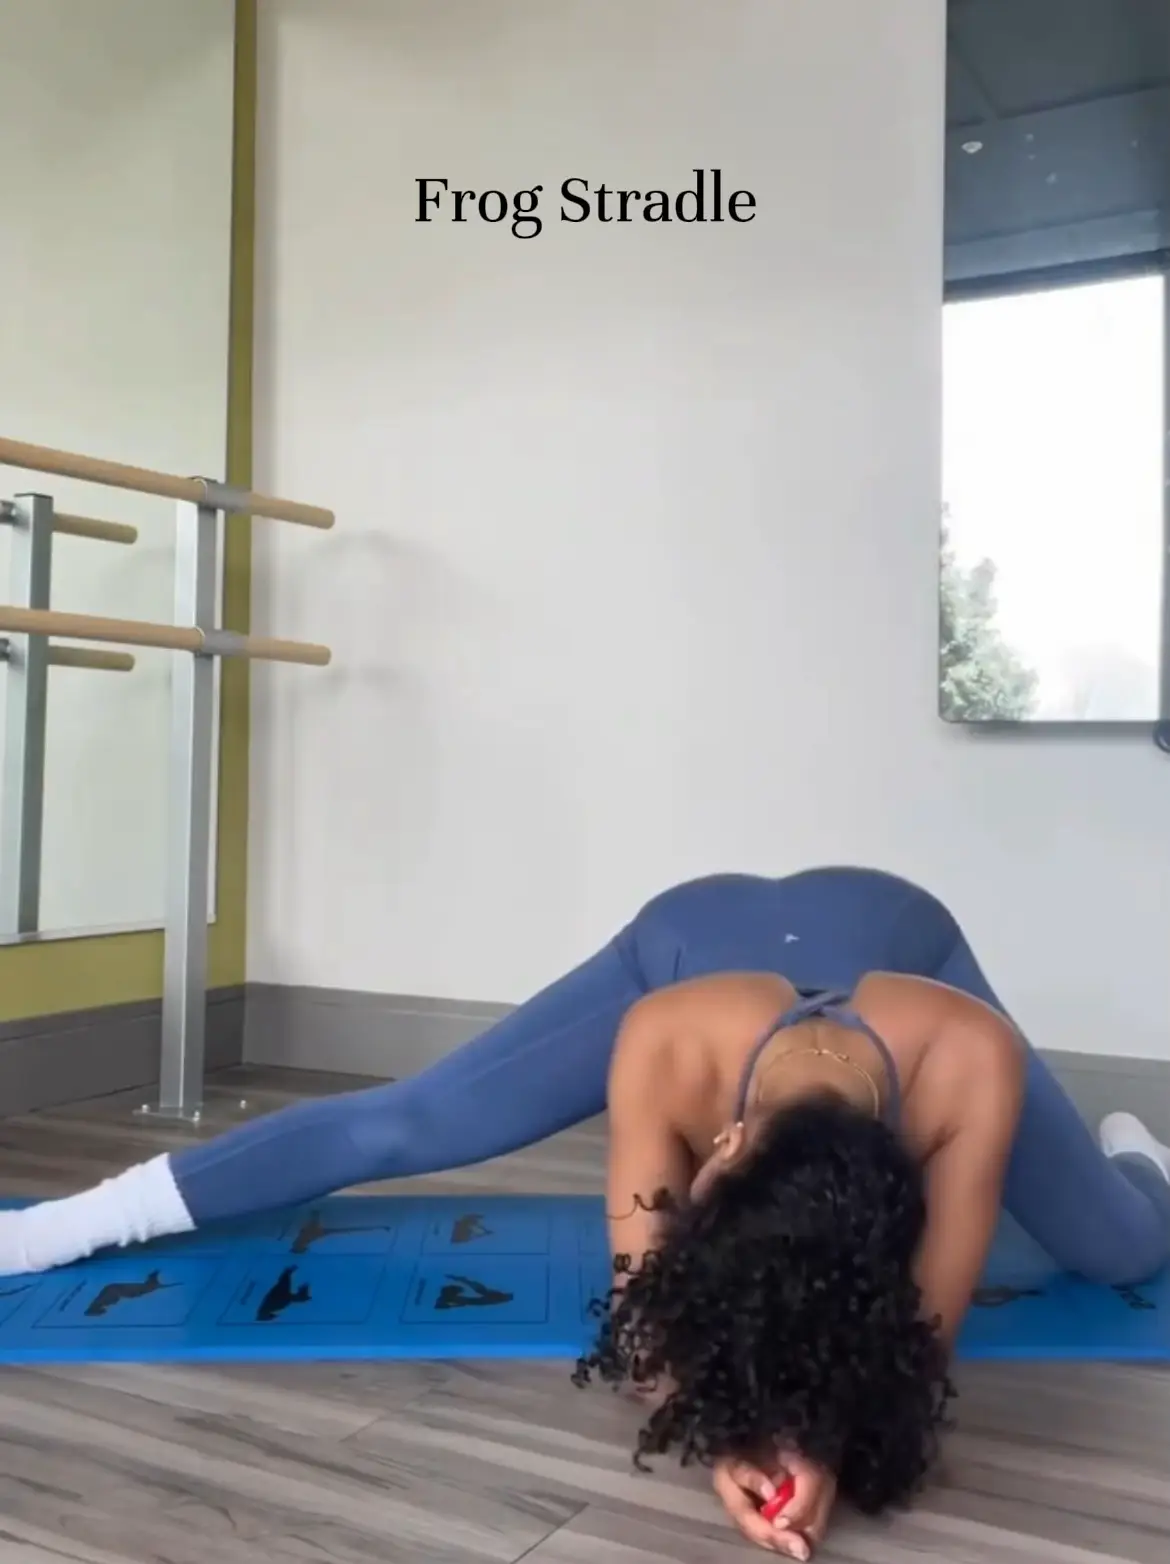 Want to learn poses that can improve your flexibility with the Yoga Trapeze?  🤔 This week, we'll learn how to do the SIDE BANANA pose 🤸 Here's some